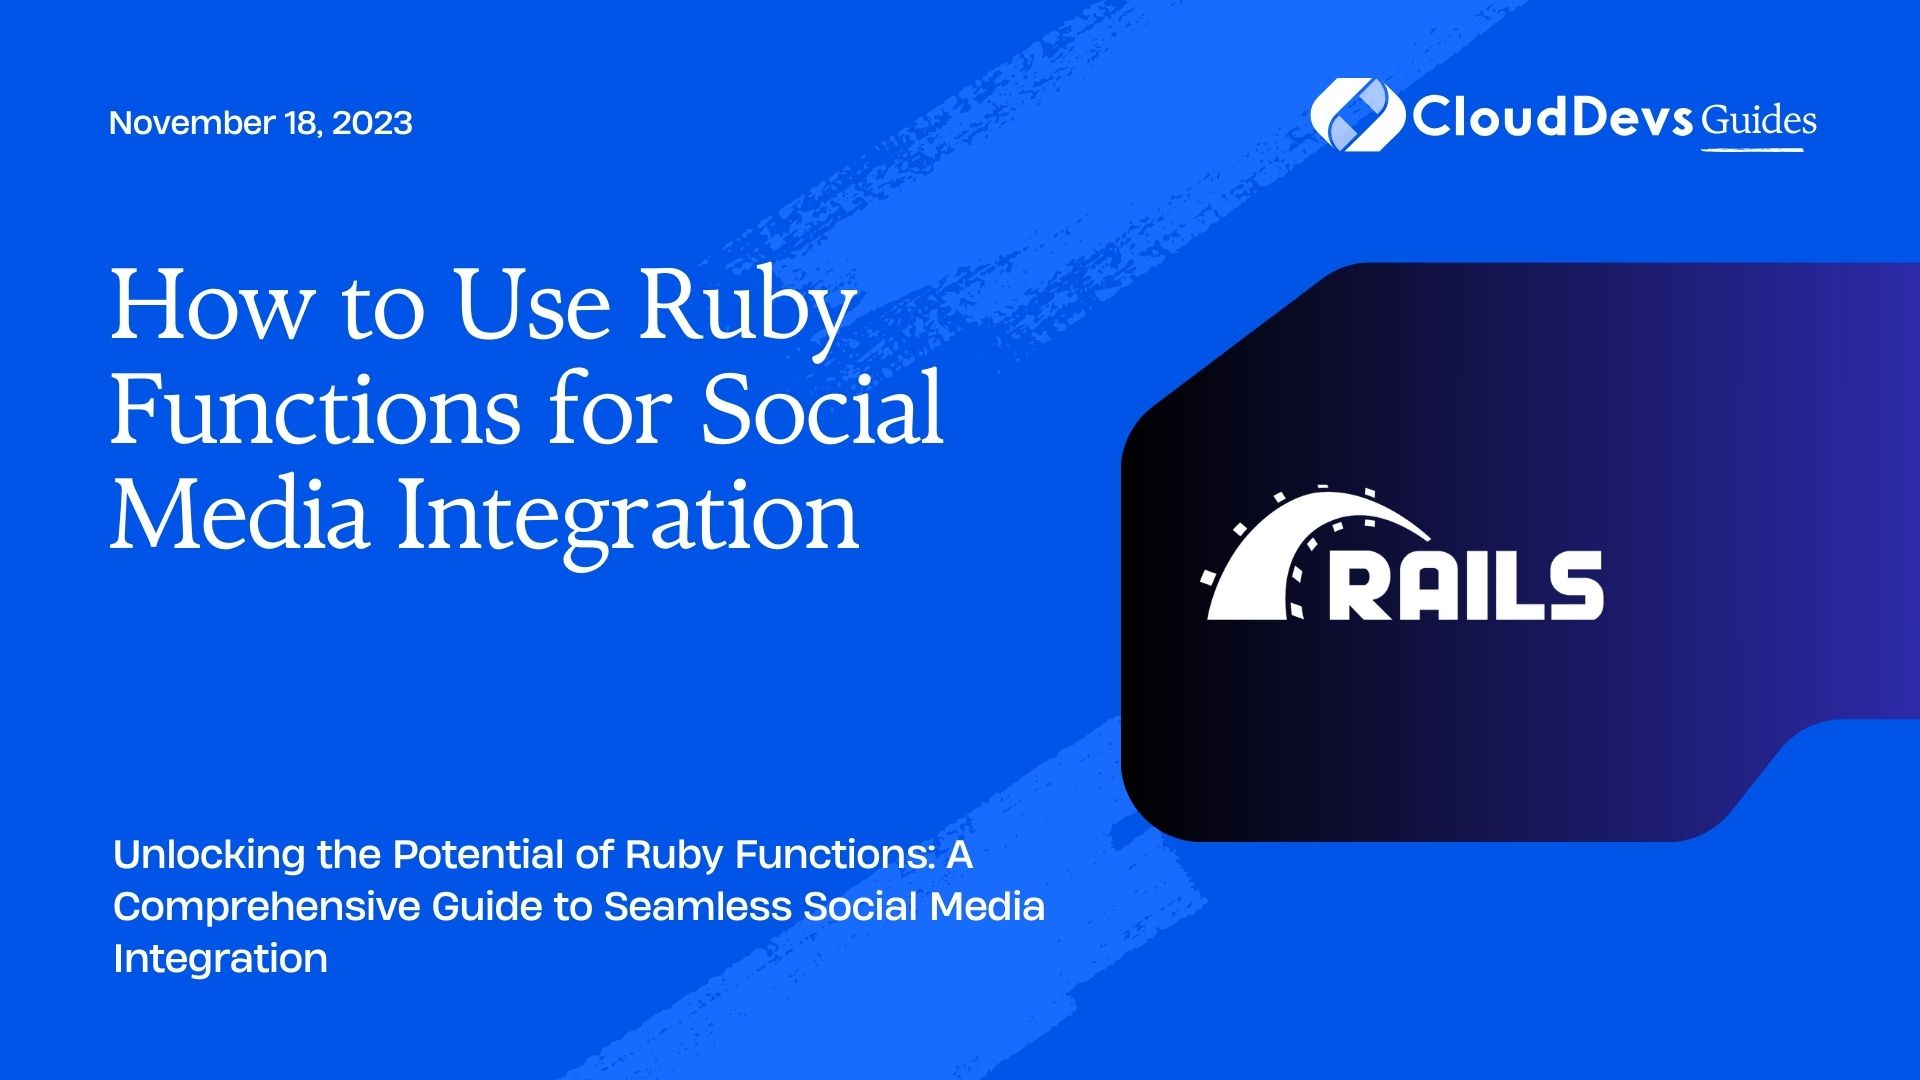 How to Use Ruby Functions for Social Media Integration